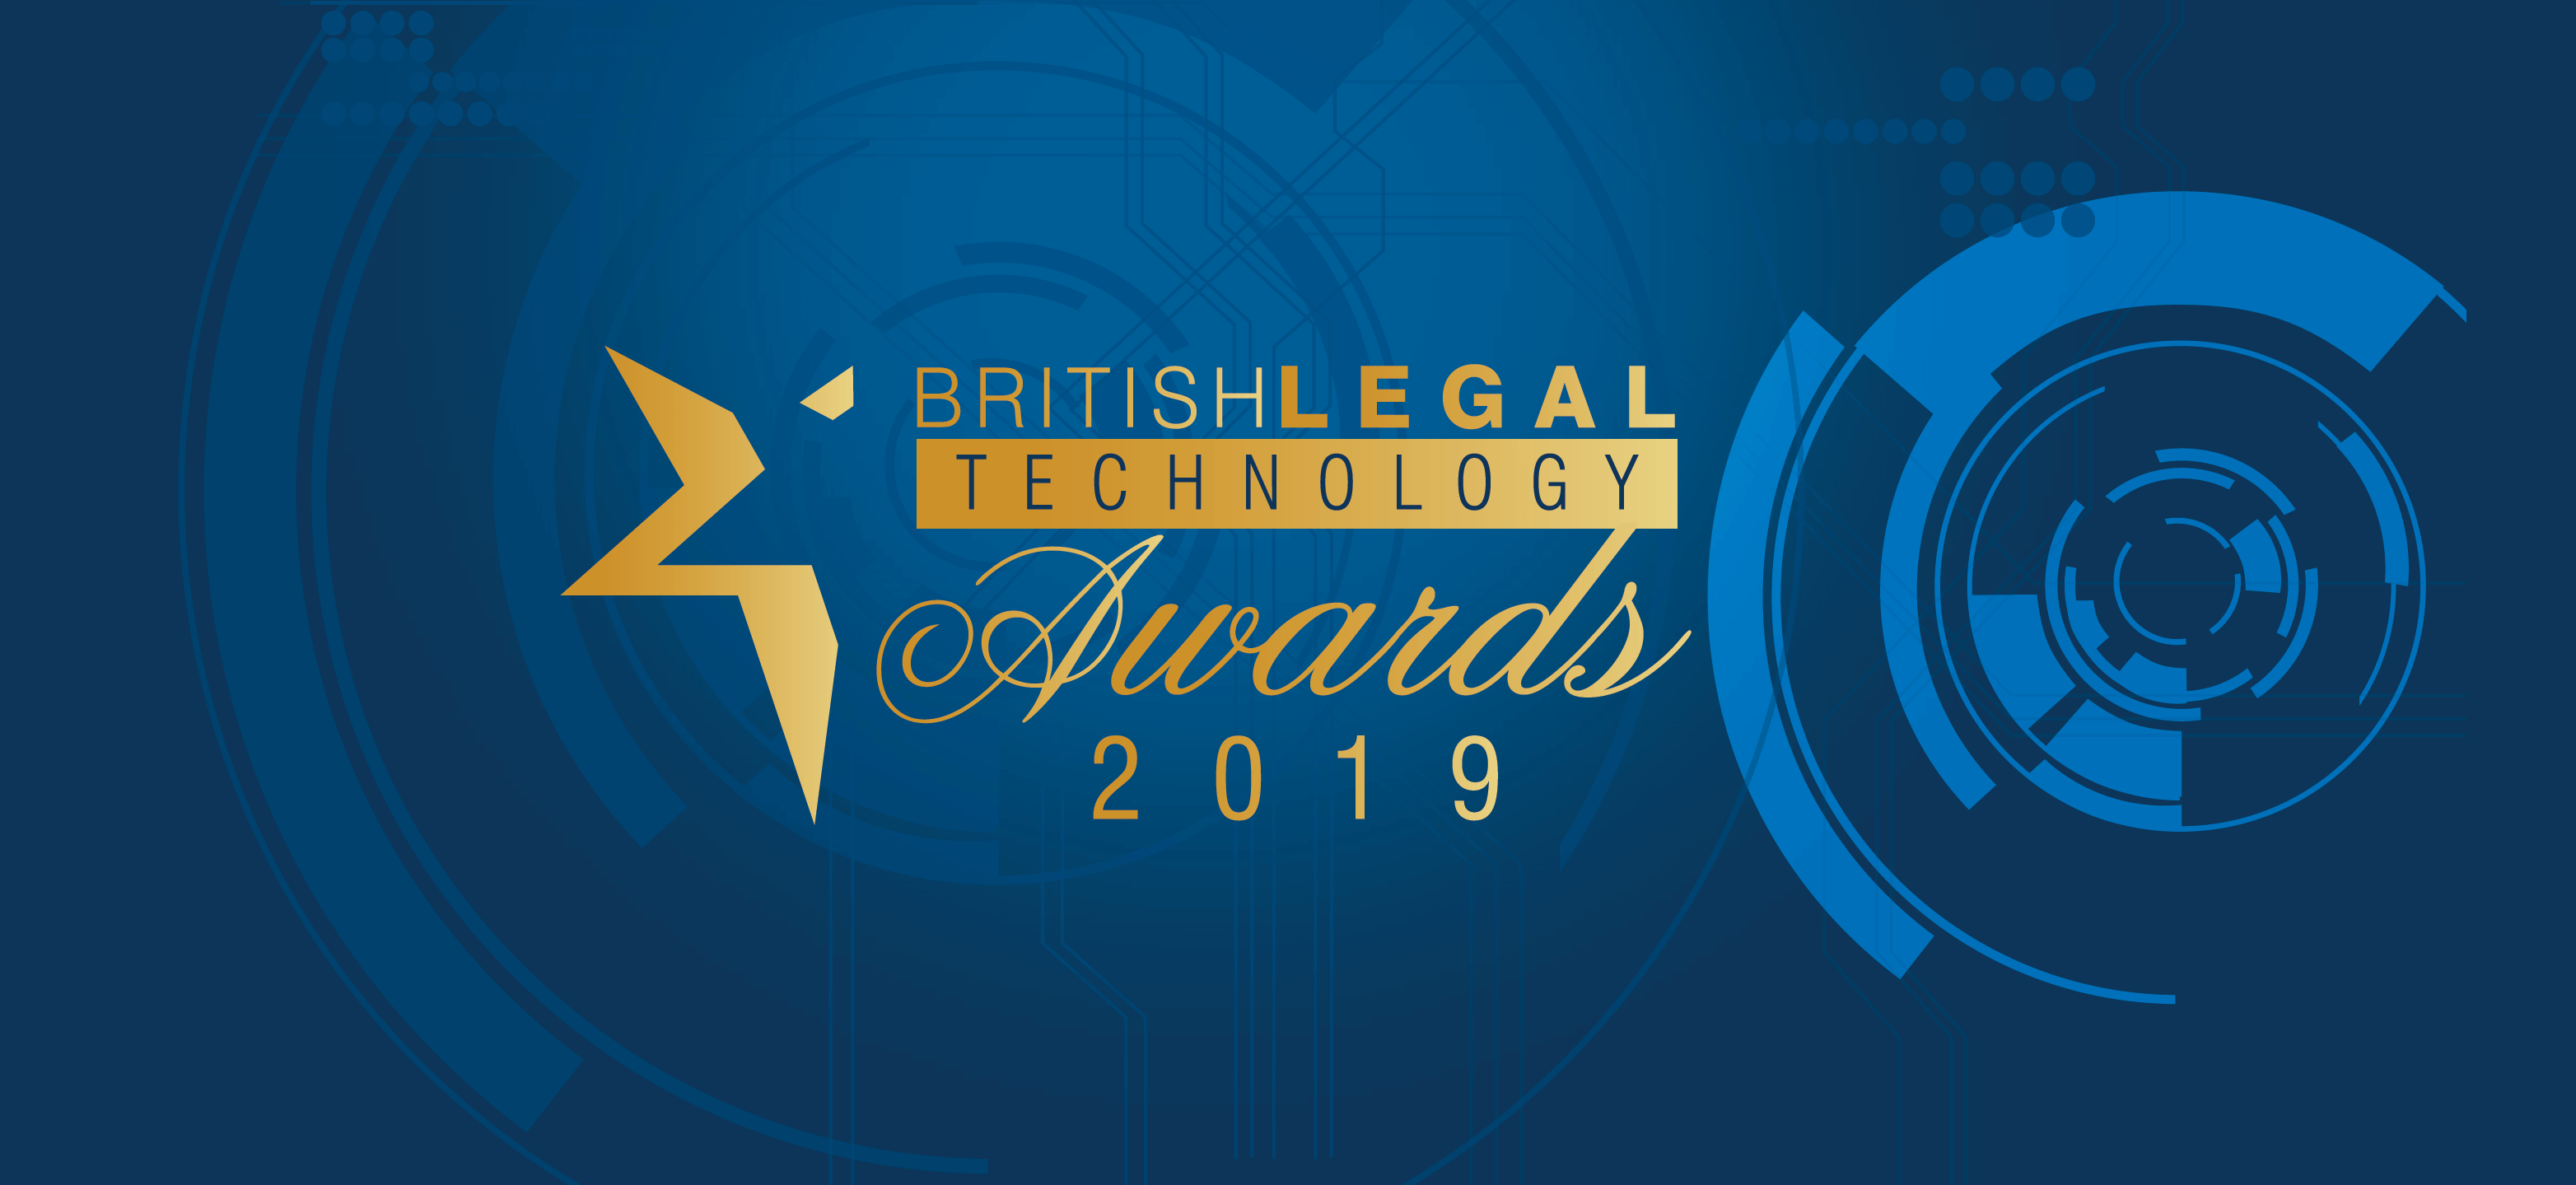 Cisilion at the British Legal Technology Awards 2019